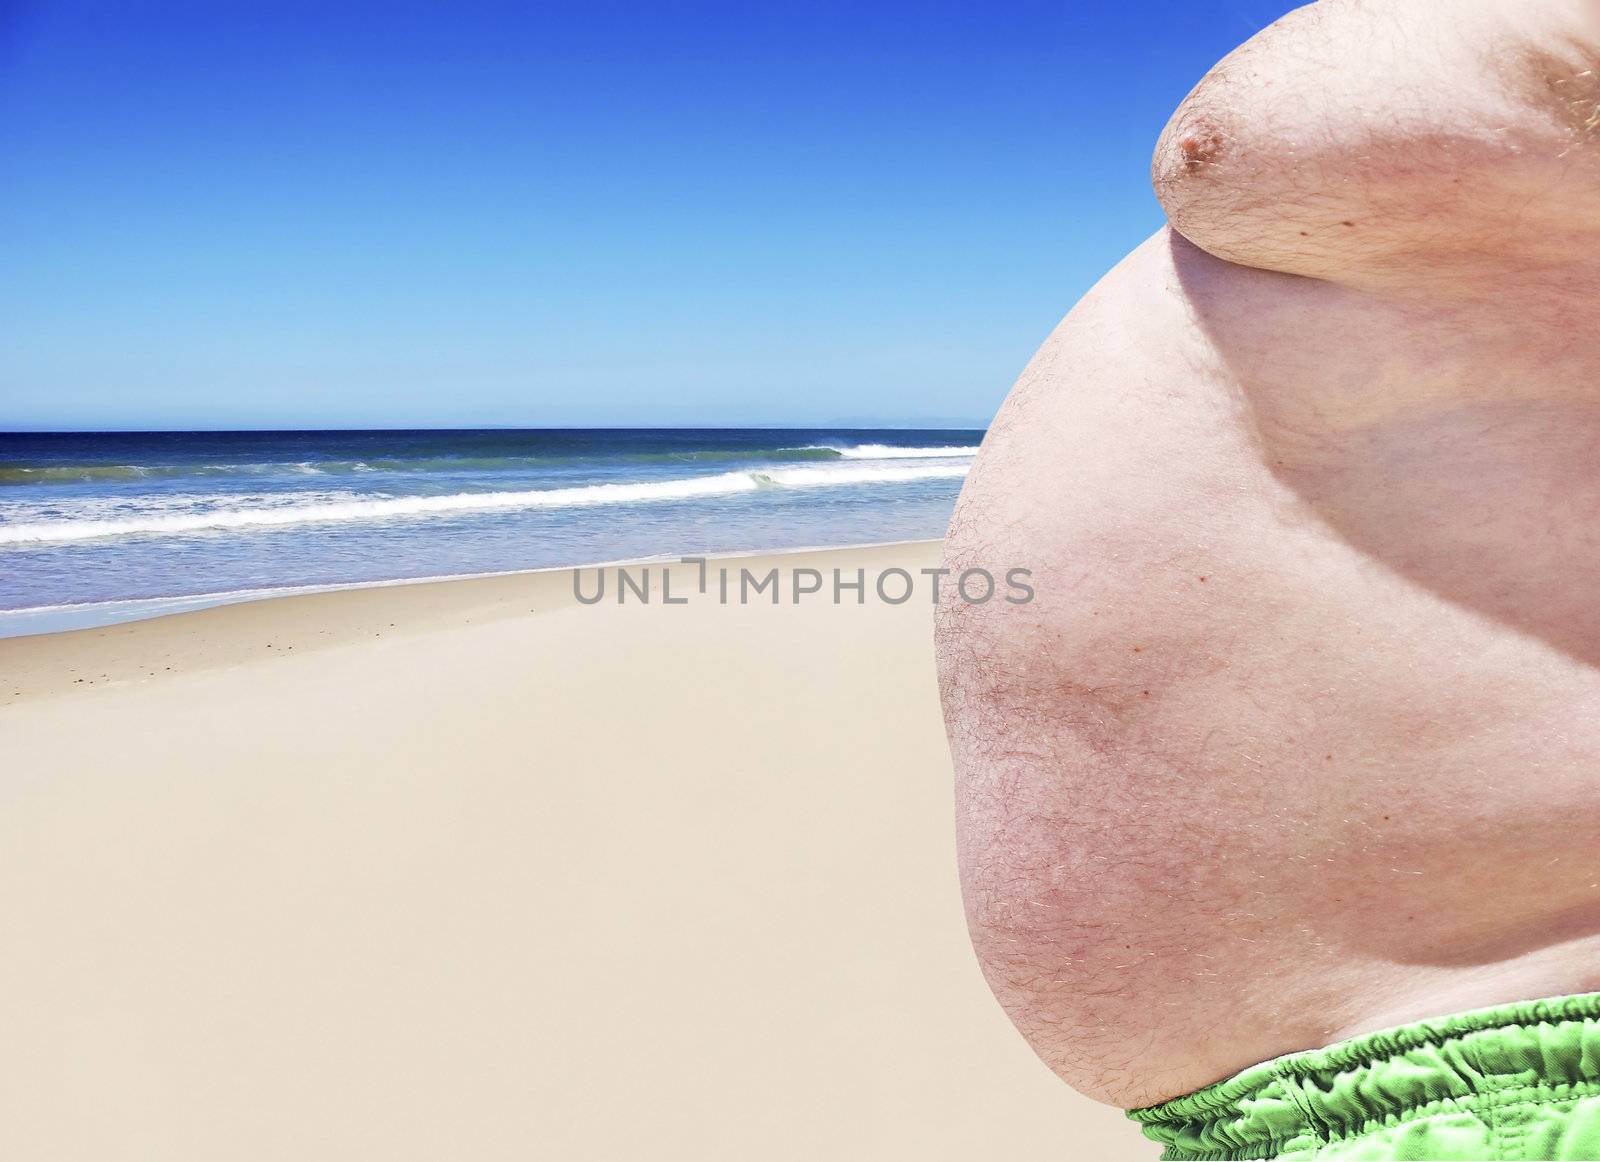 Close up of three obese fat men of the beach